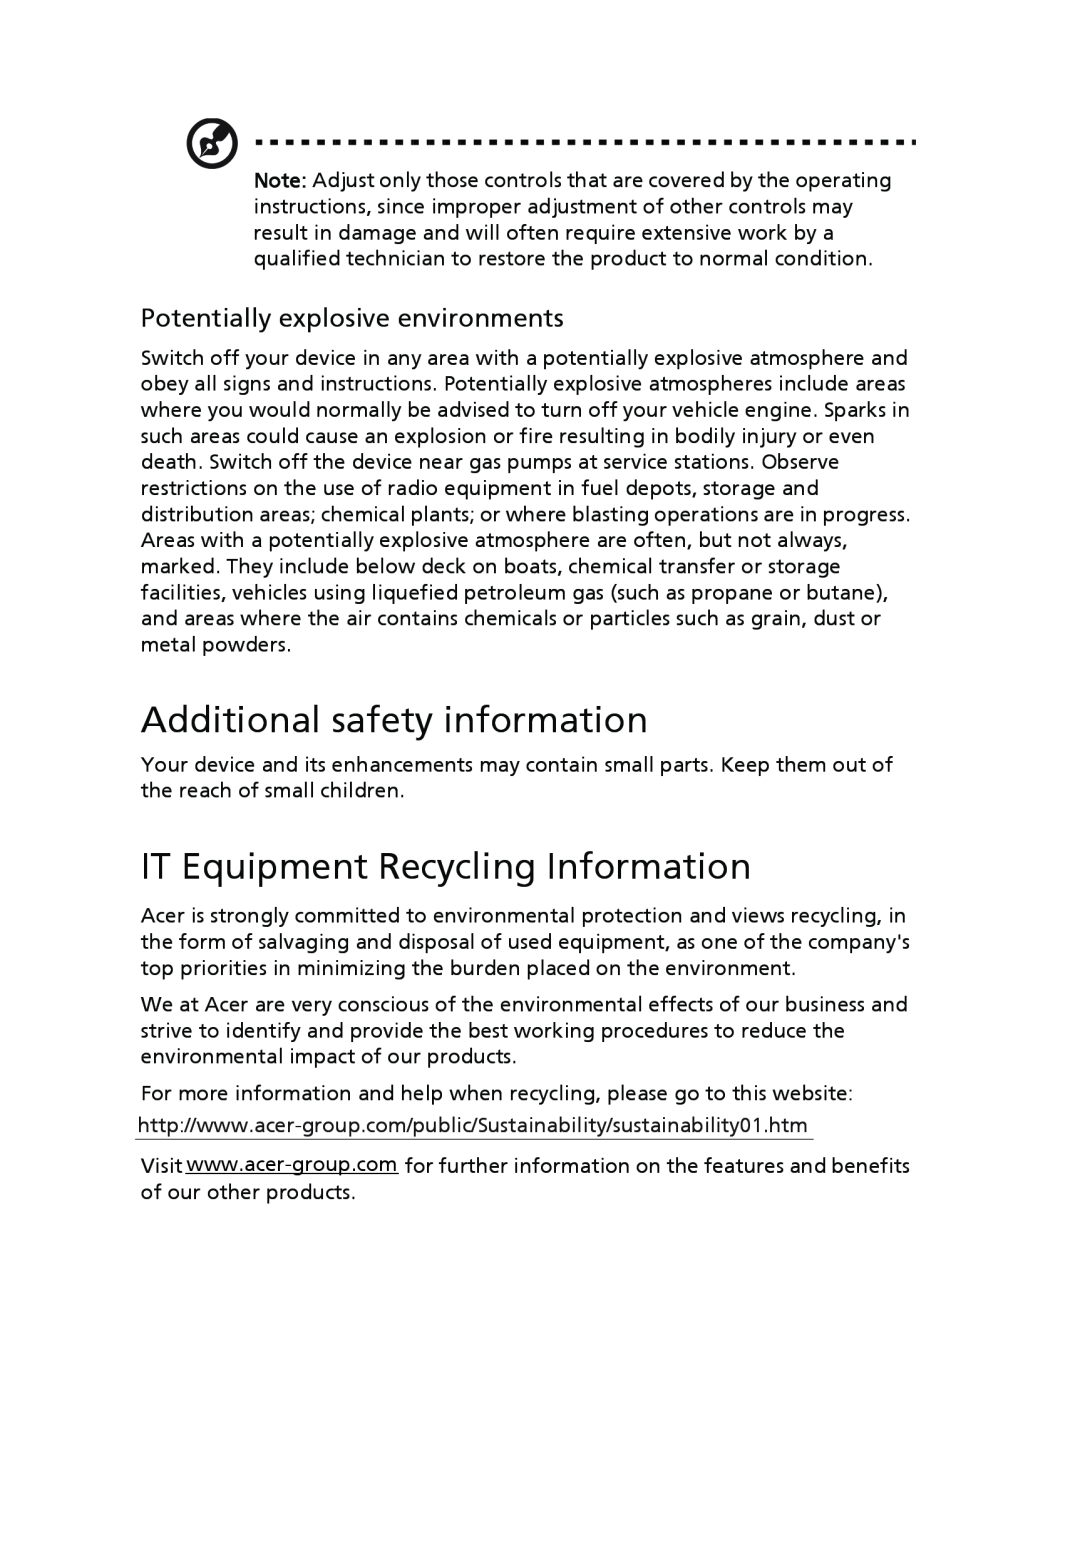 Acer X203H manual Additional safety information, IT Equipment Recycling Information, Potentially explosive environments 